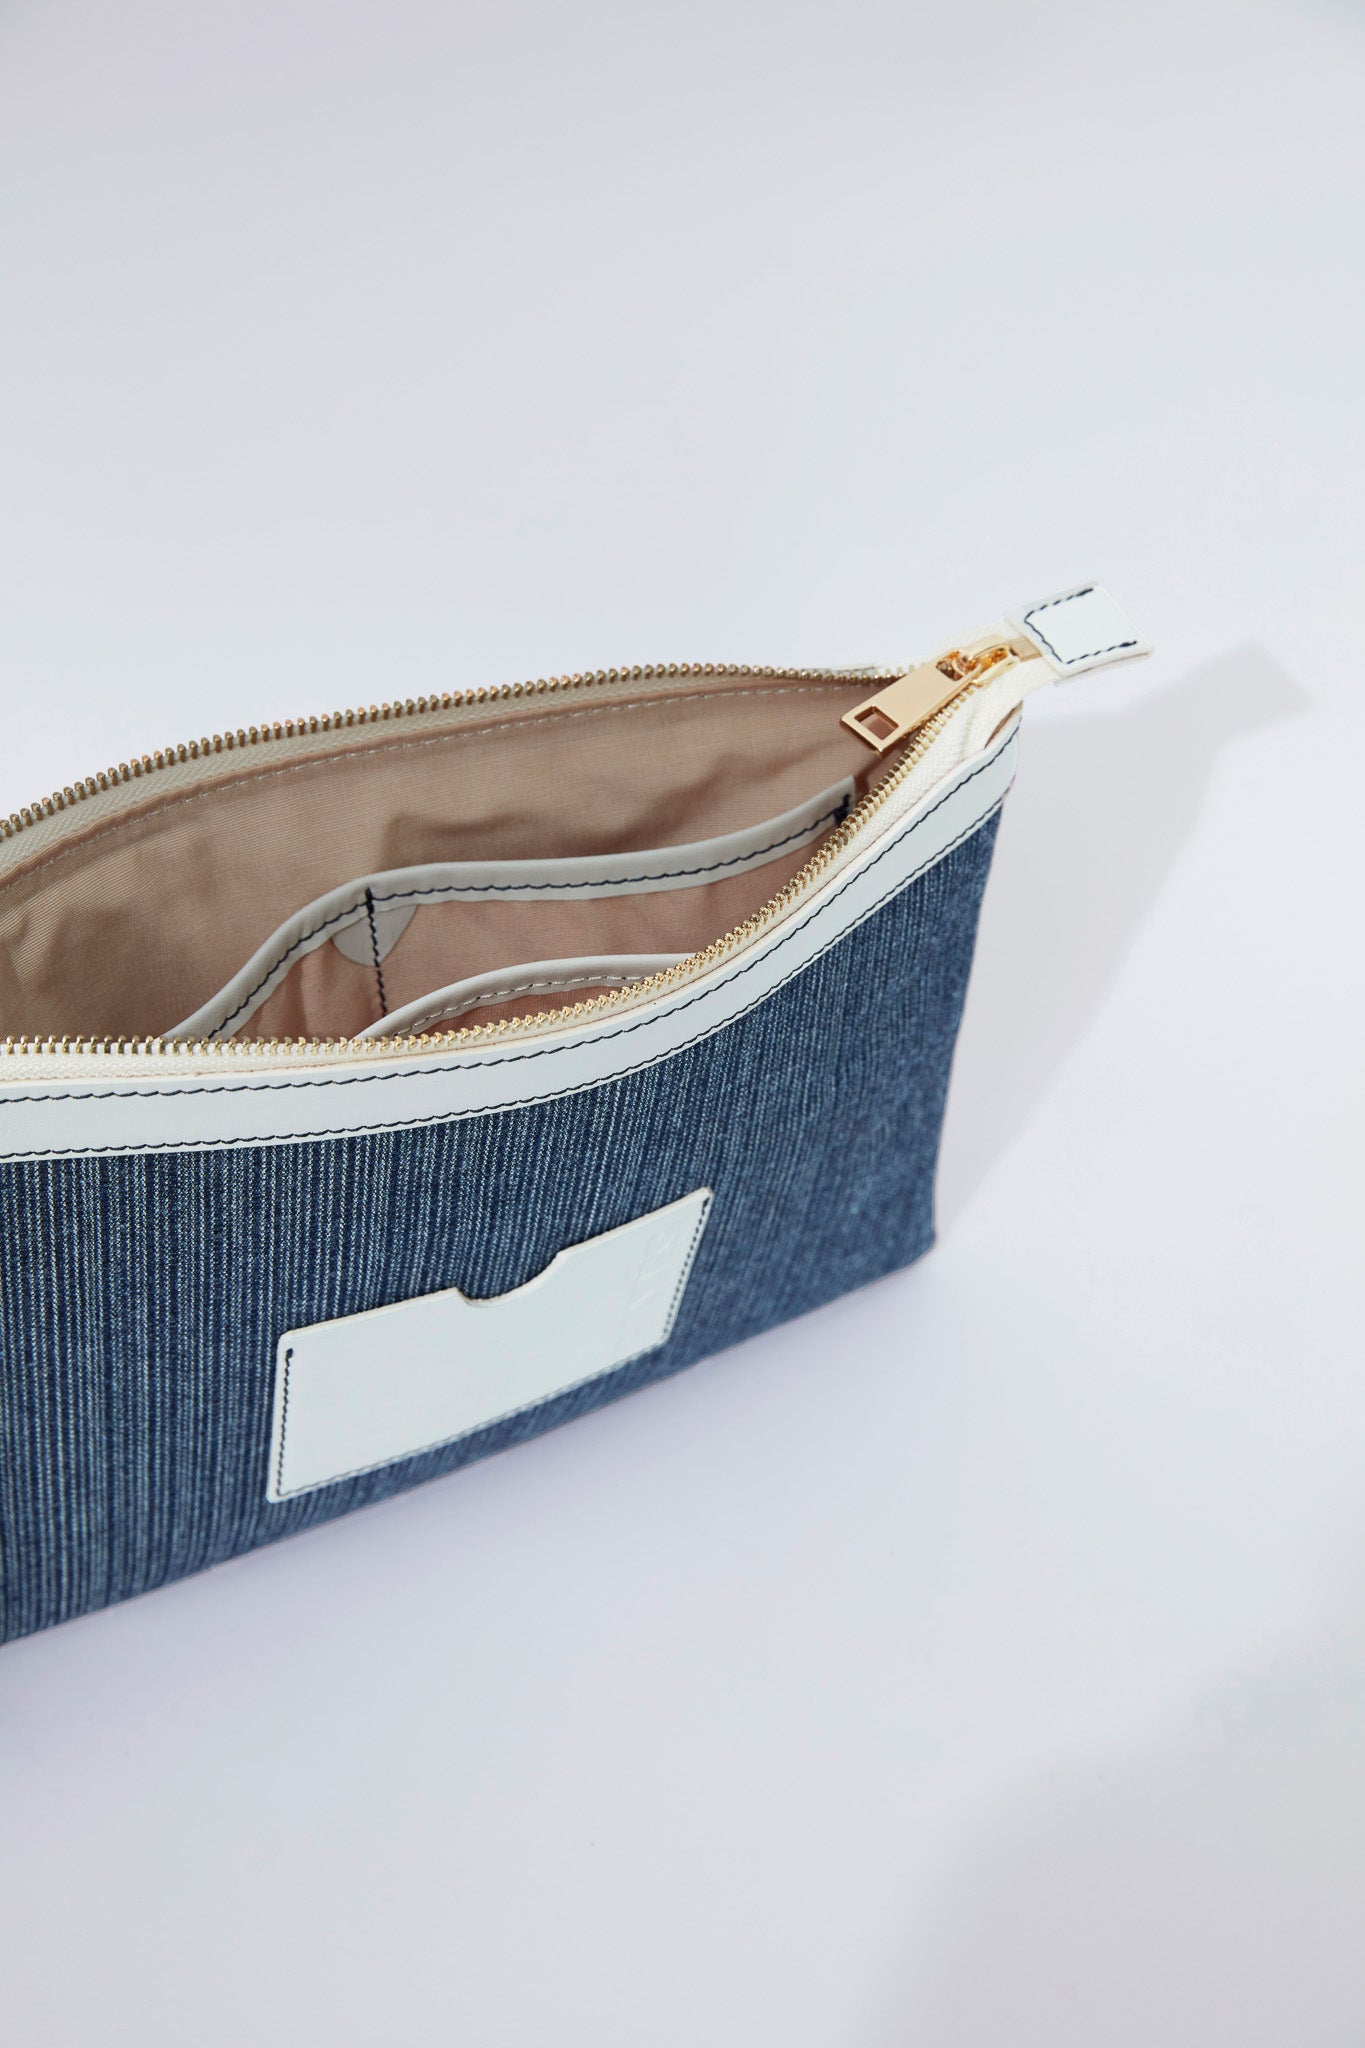 STITCHED CLUTCH BAG IN MARINE AND OFF-WHITE